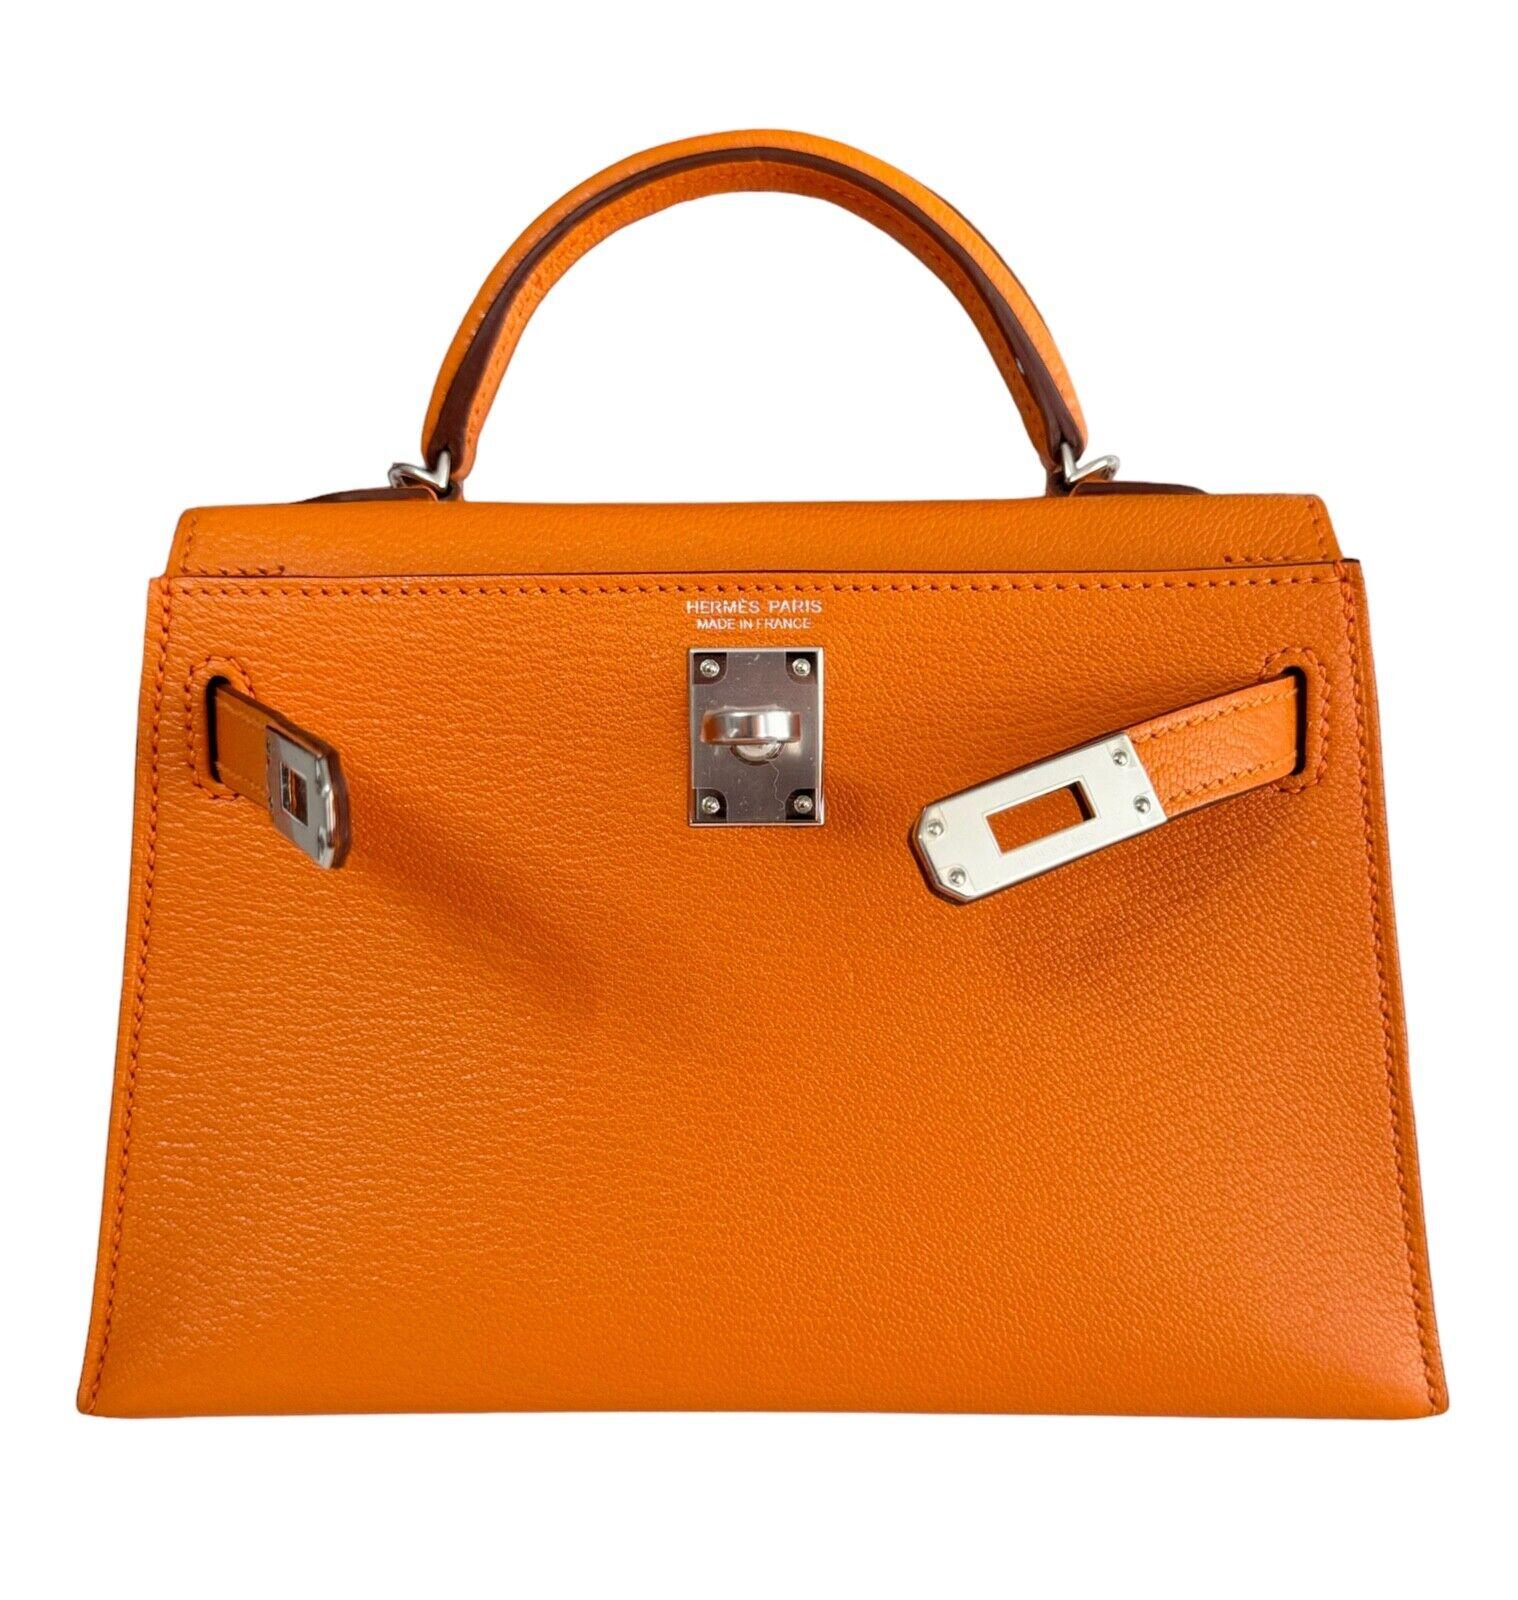 As New Ultra Rare and Hardest to get Hermes Mini Kelly 20 Verso Orange Chèvre Leather Sanguine Interior. Complimented by Palladium Hardware. Y Stamp 2020. Includes all Accessories and Box.

Shop with Confidence from Lux Addicts. We are a very well